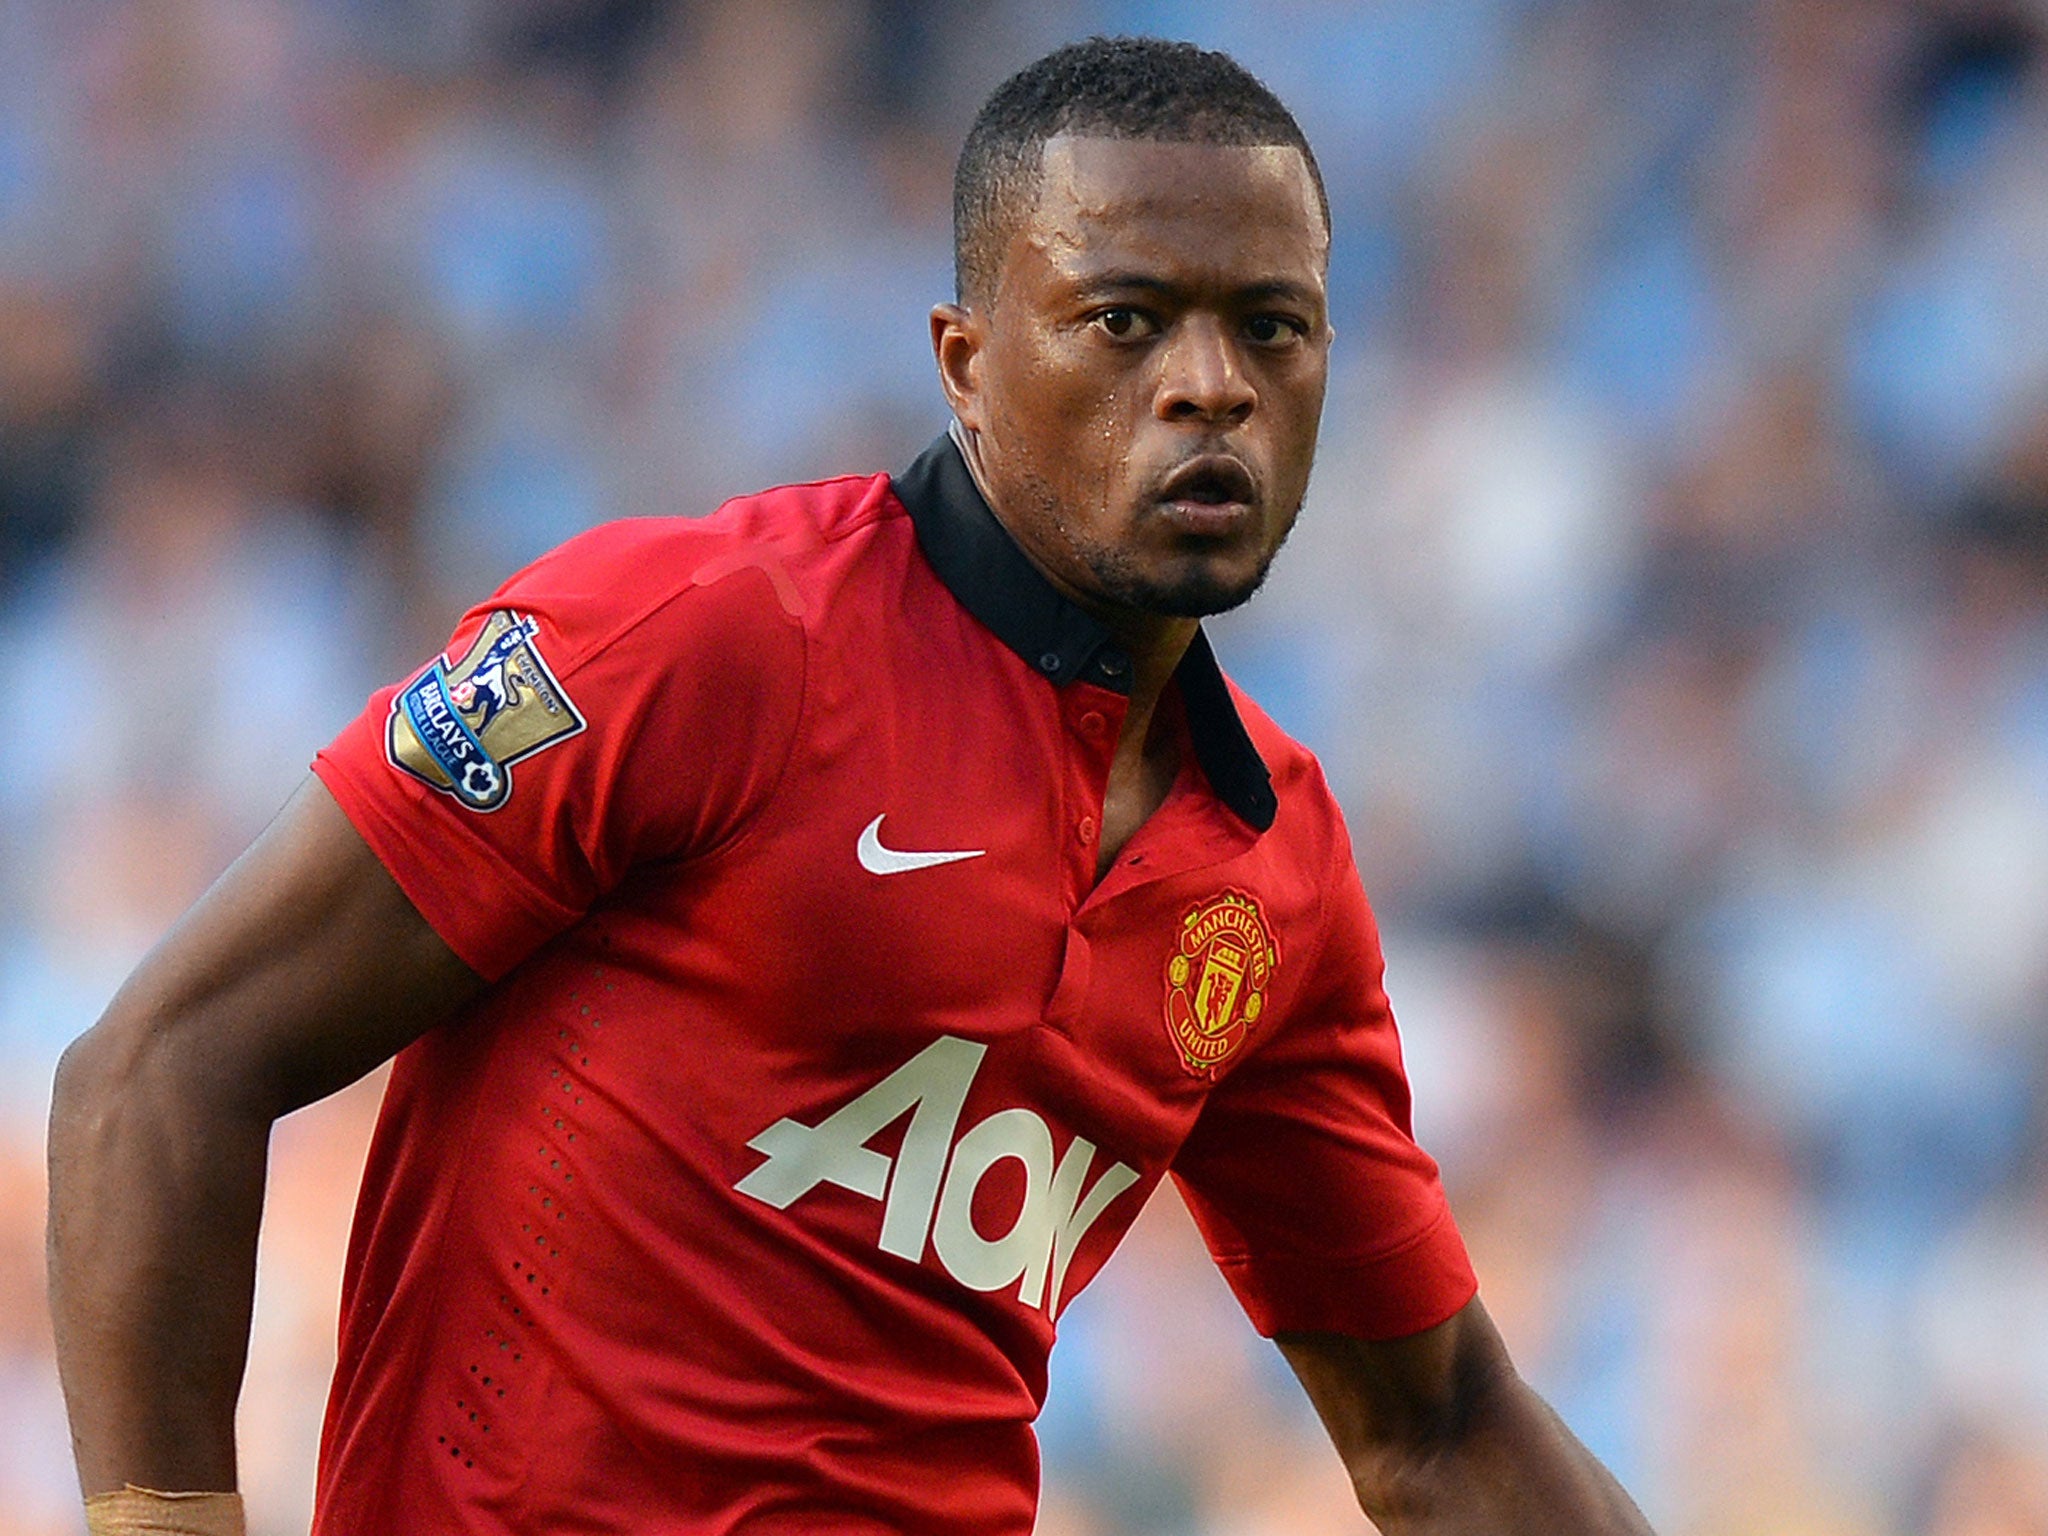 Patrice Evra had strong words for his critics